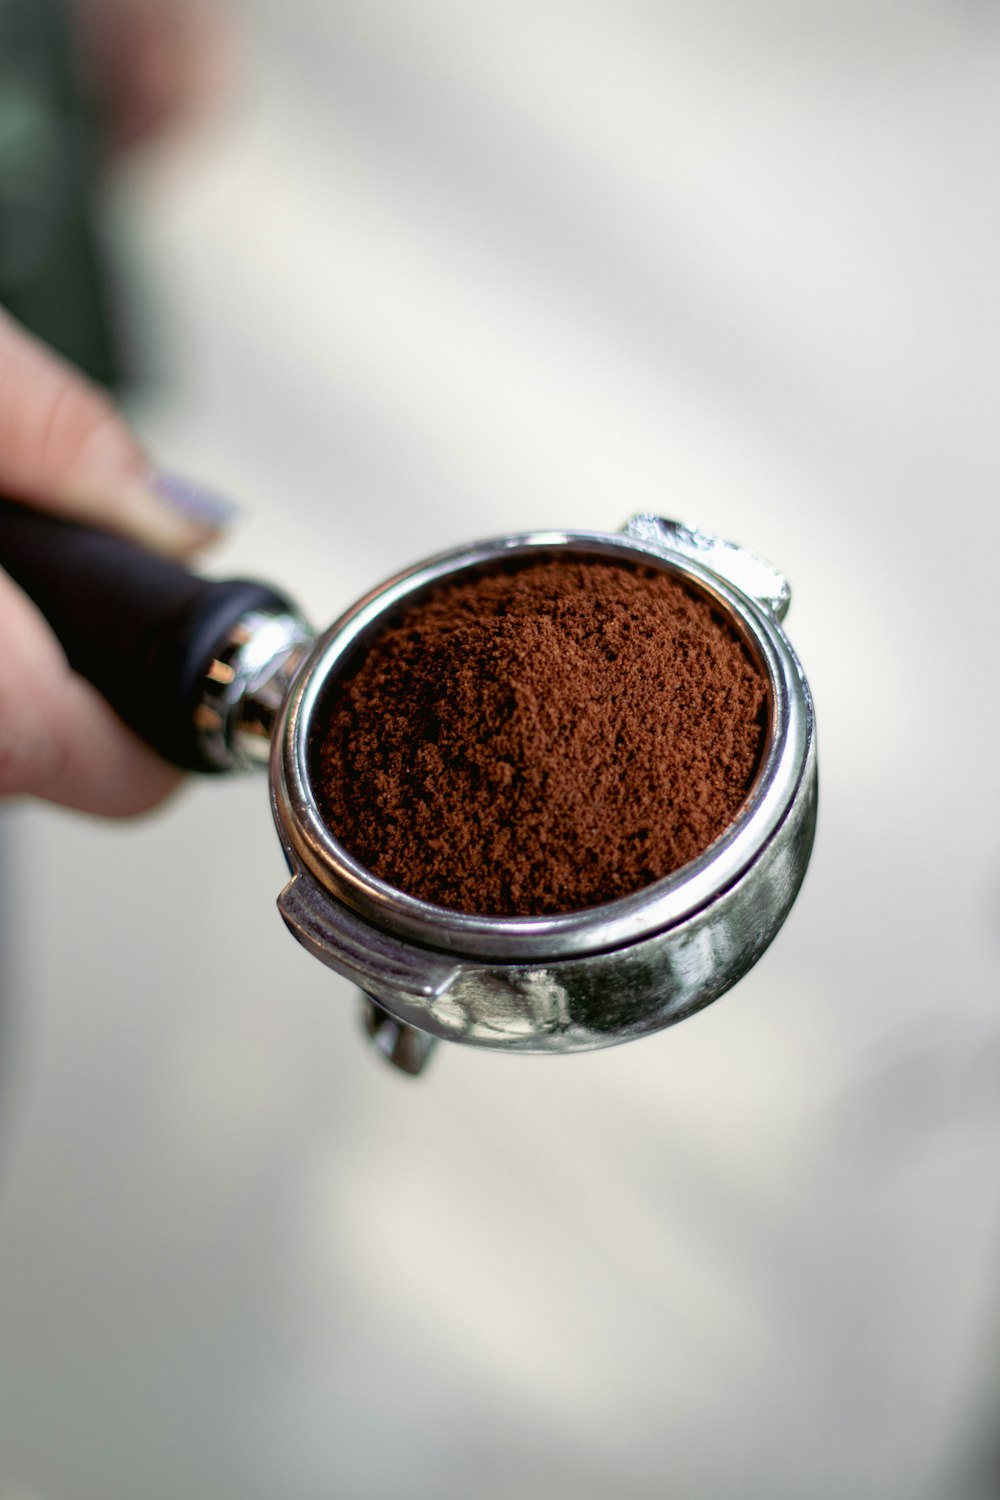 a person holding a cup of ground coffee